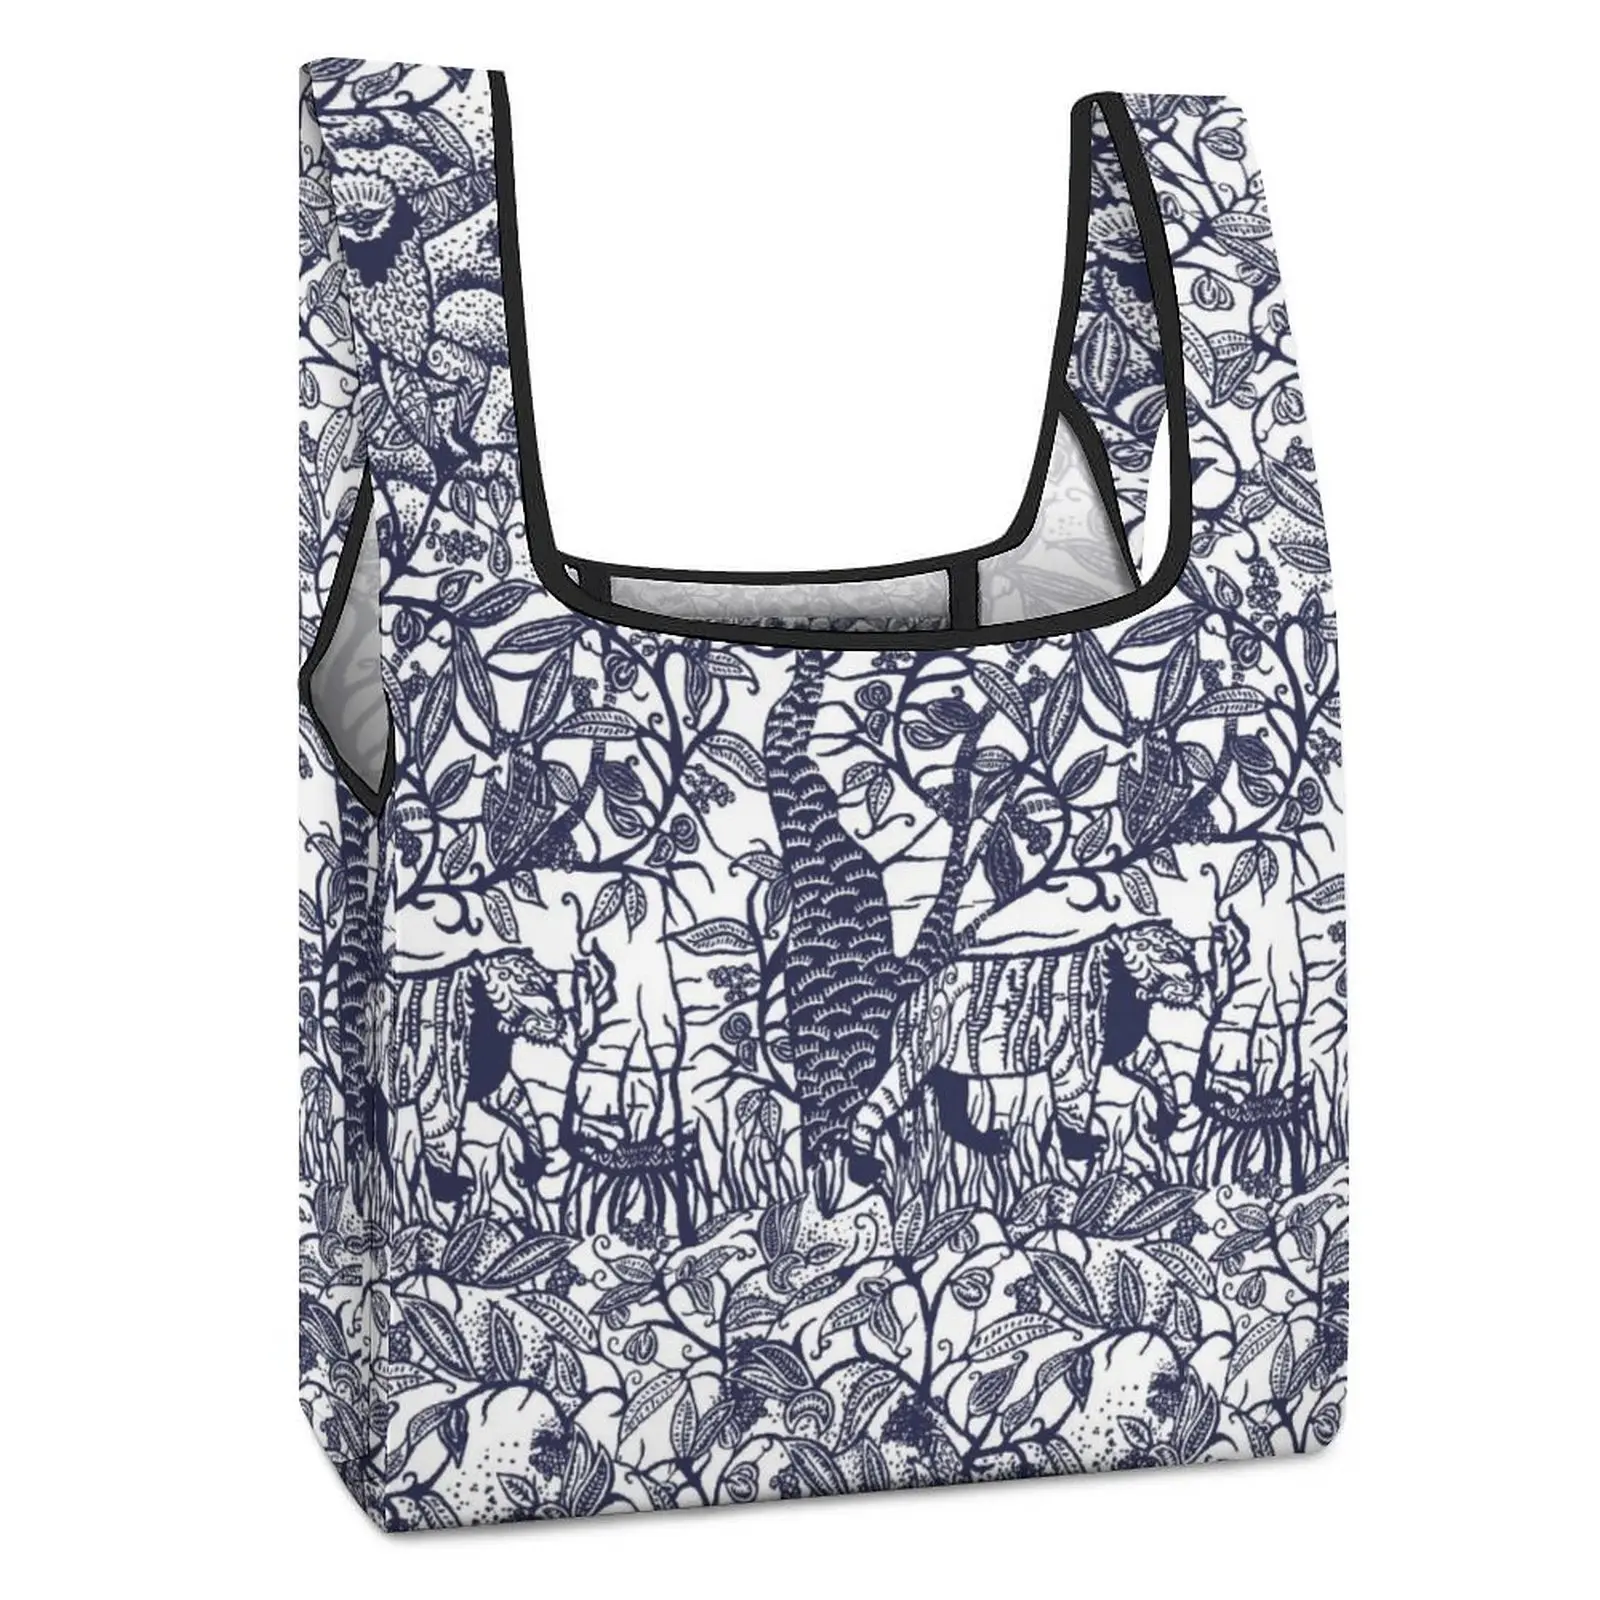 Customized Printed Bags Shopper Shoulder Bag Blue Pattern Style Shopping Tote Casual Woman Grocery Handbag Customizable Pattern